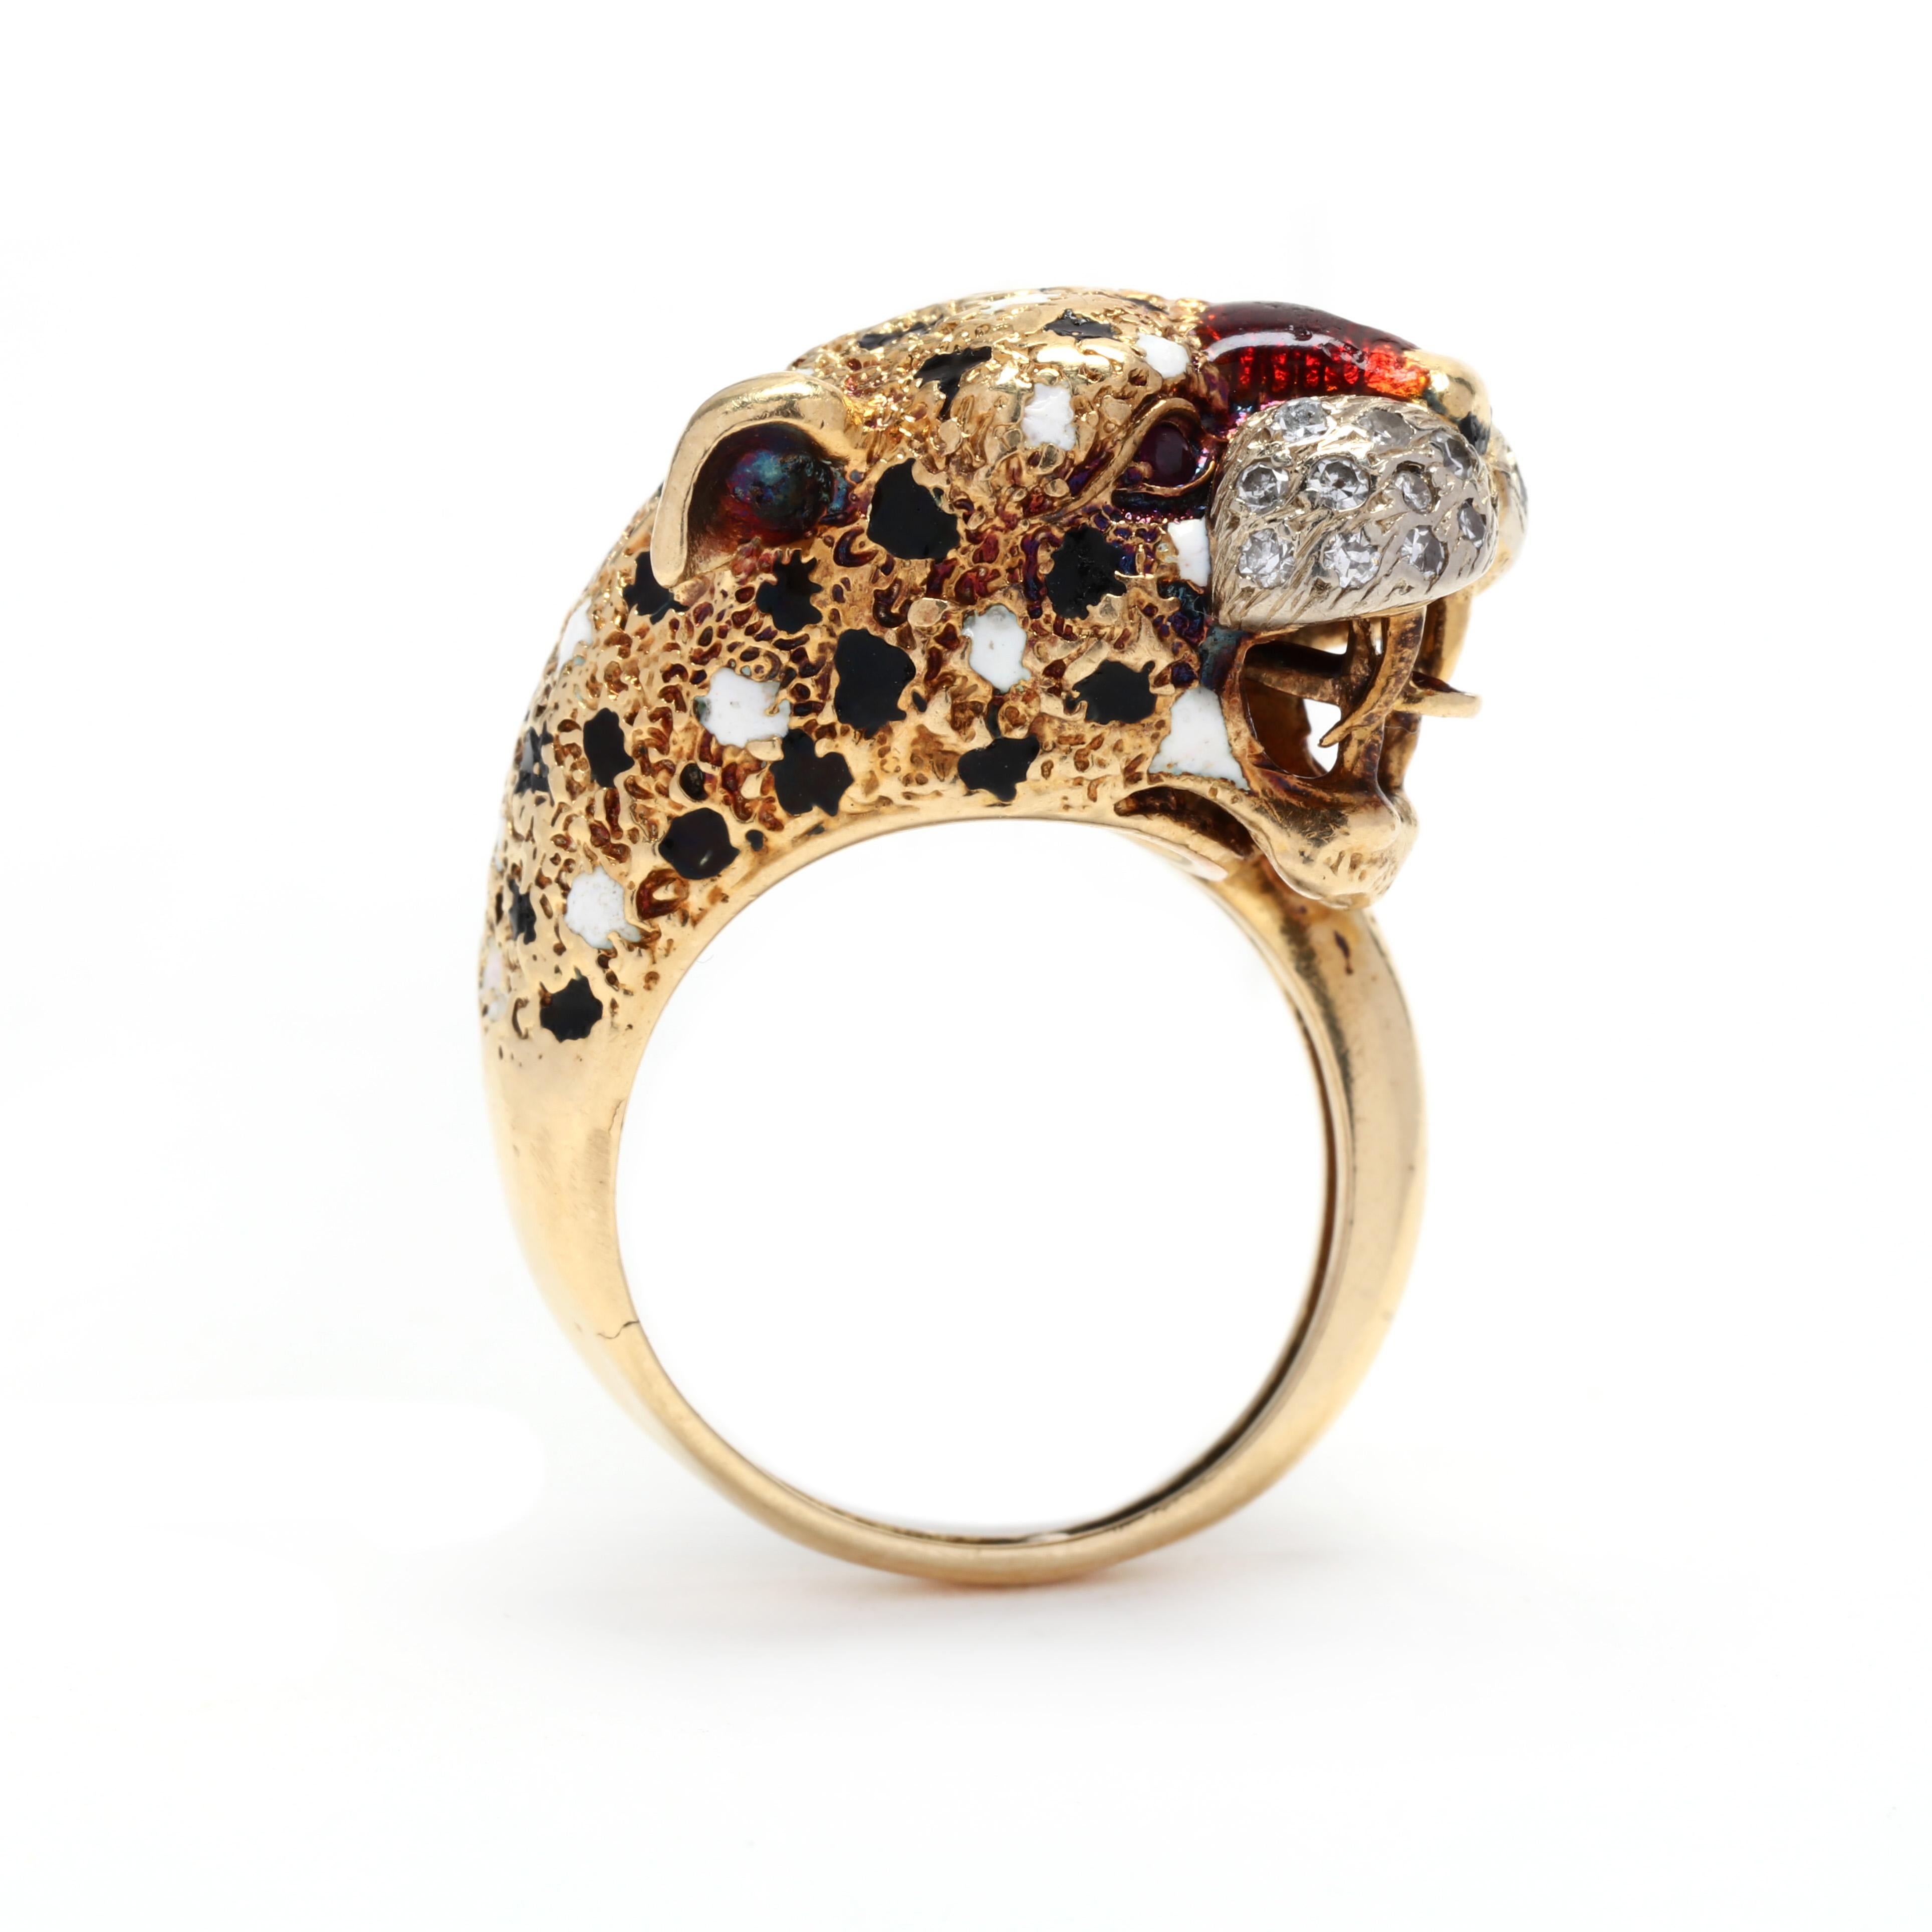 A vintage 18 karat yellow gold and gem-set cheetah ring. This ring features a cheetah head motif with black and white enamel detailing, set with single cut diamonds for whiskers and ruby eyes. A unique ring that will stand the test of